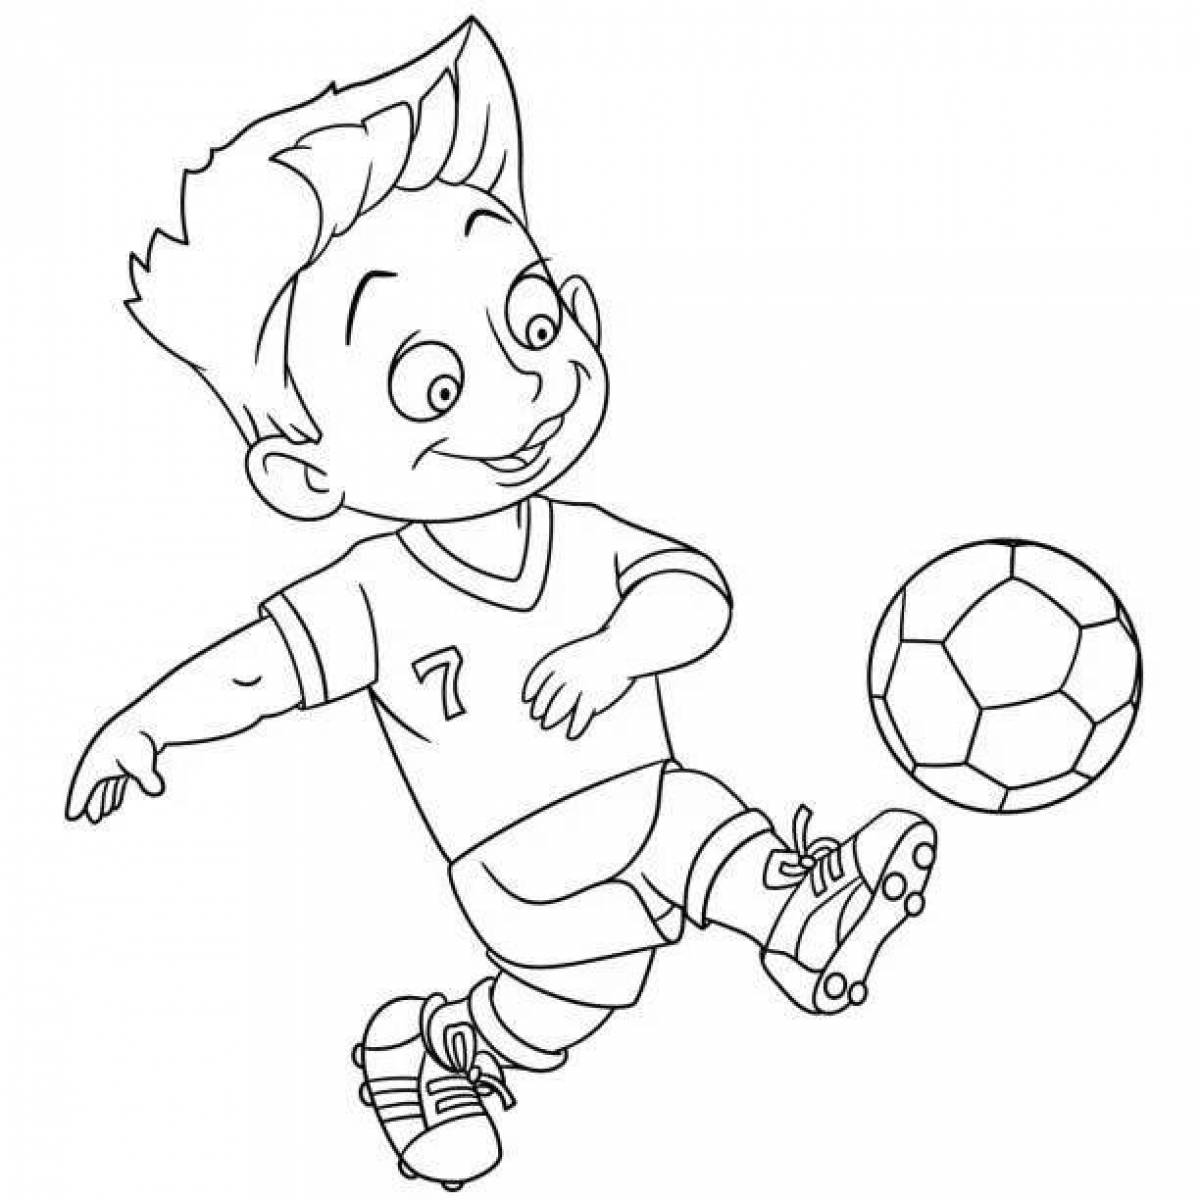 Coloring page of a cheerful football player boy